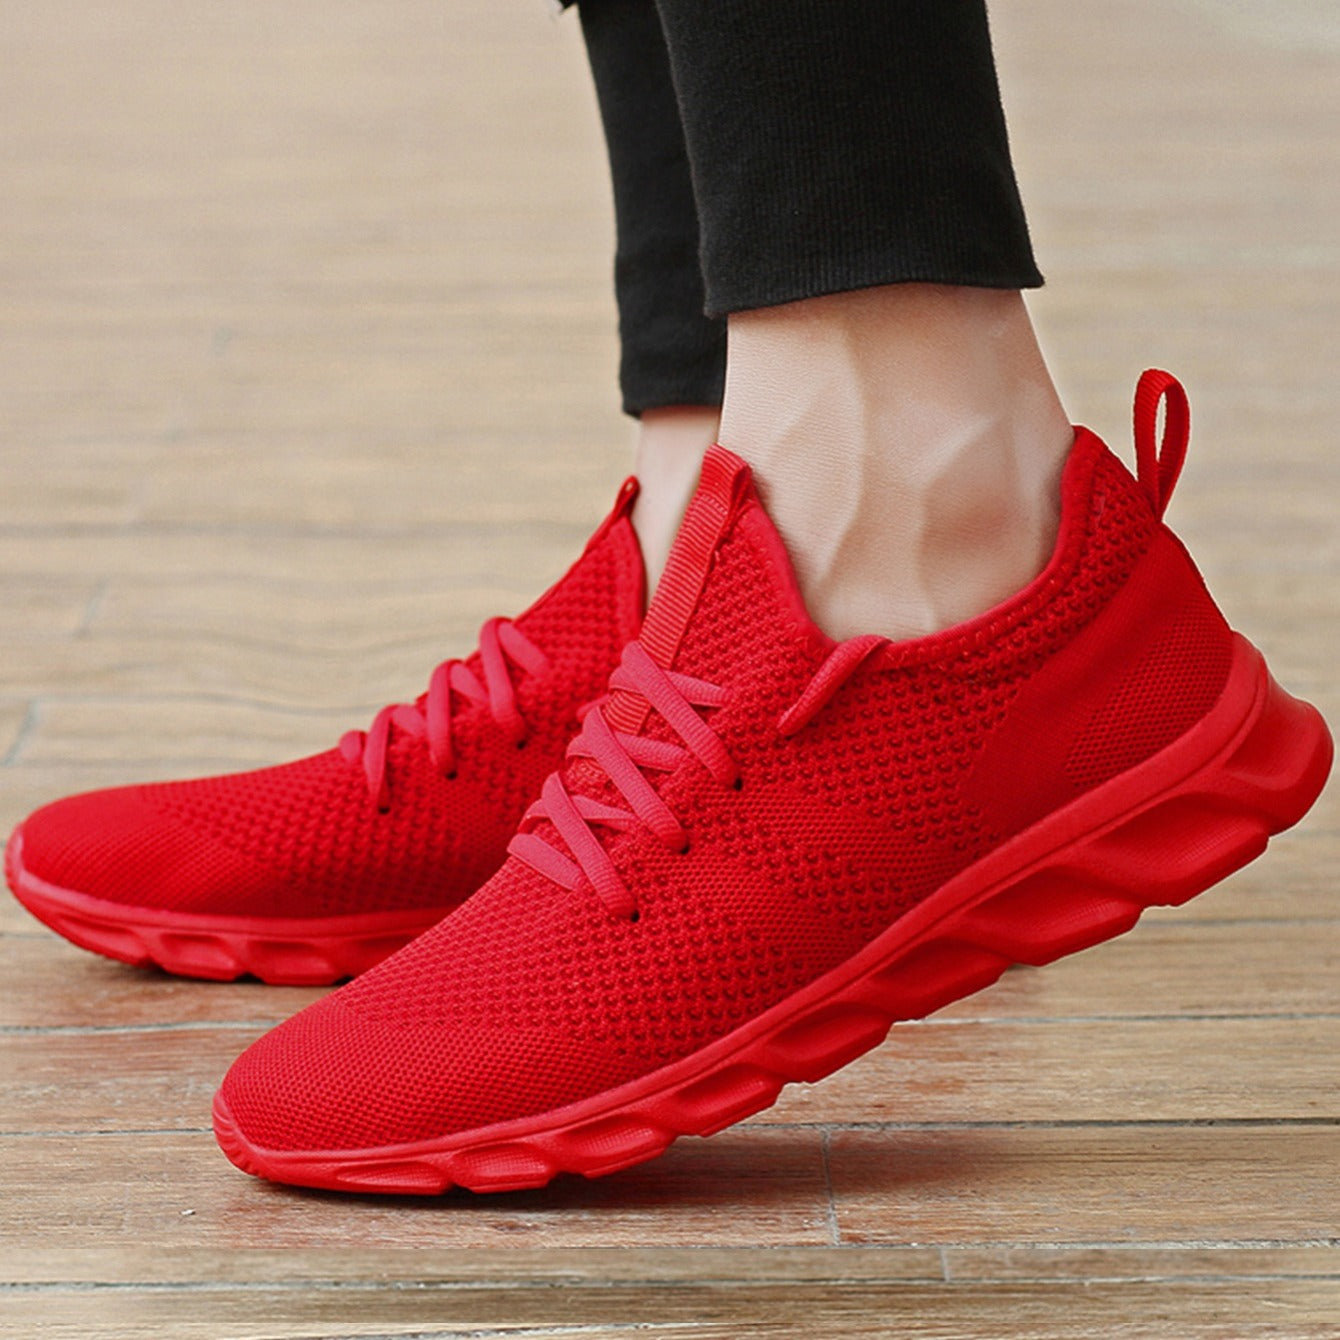 Men's Breathable Lightweight Woven Running Shoes Gift Chinese New Year Gift